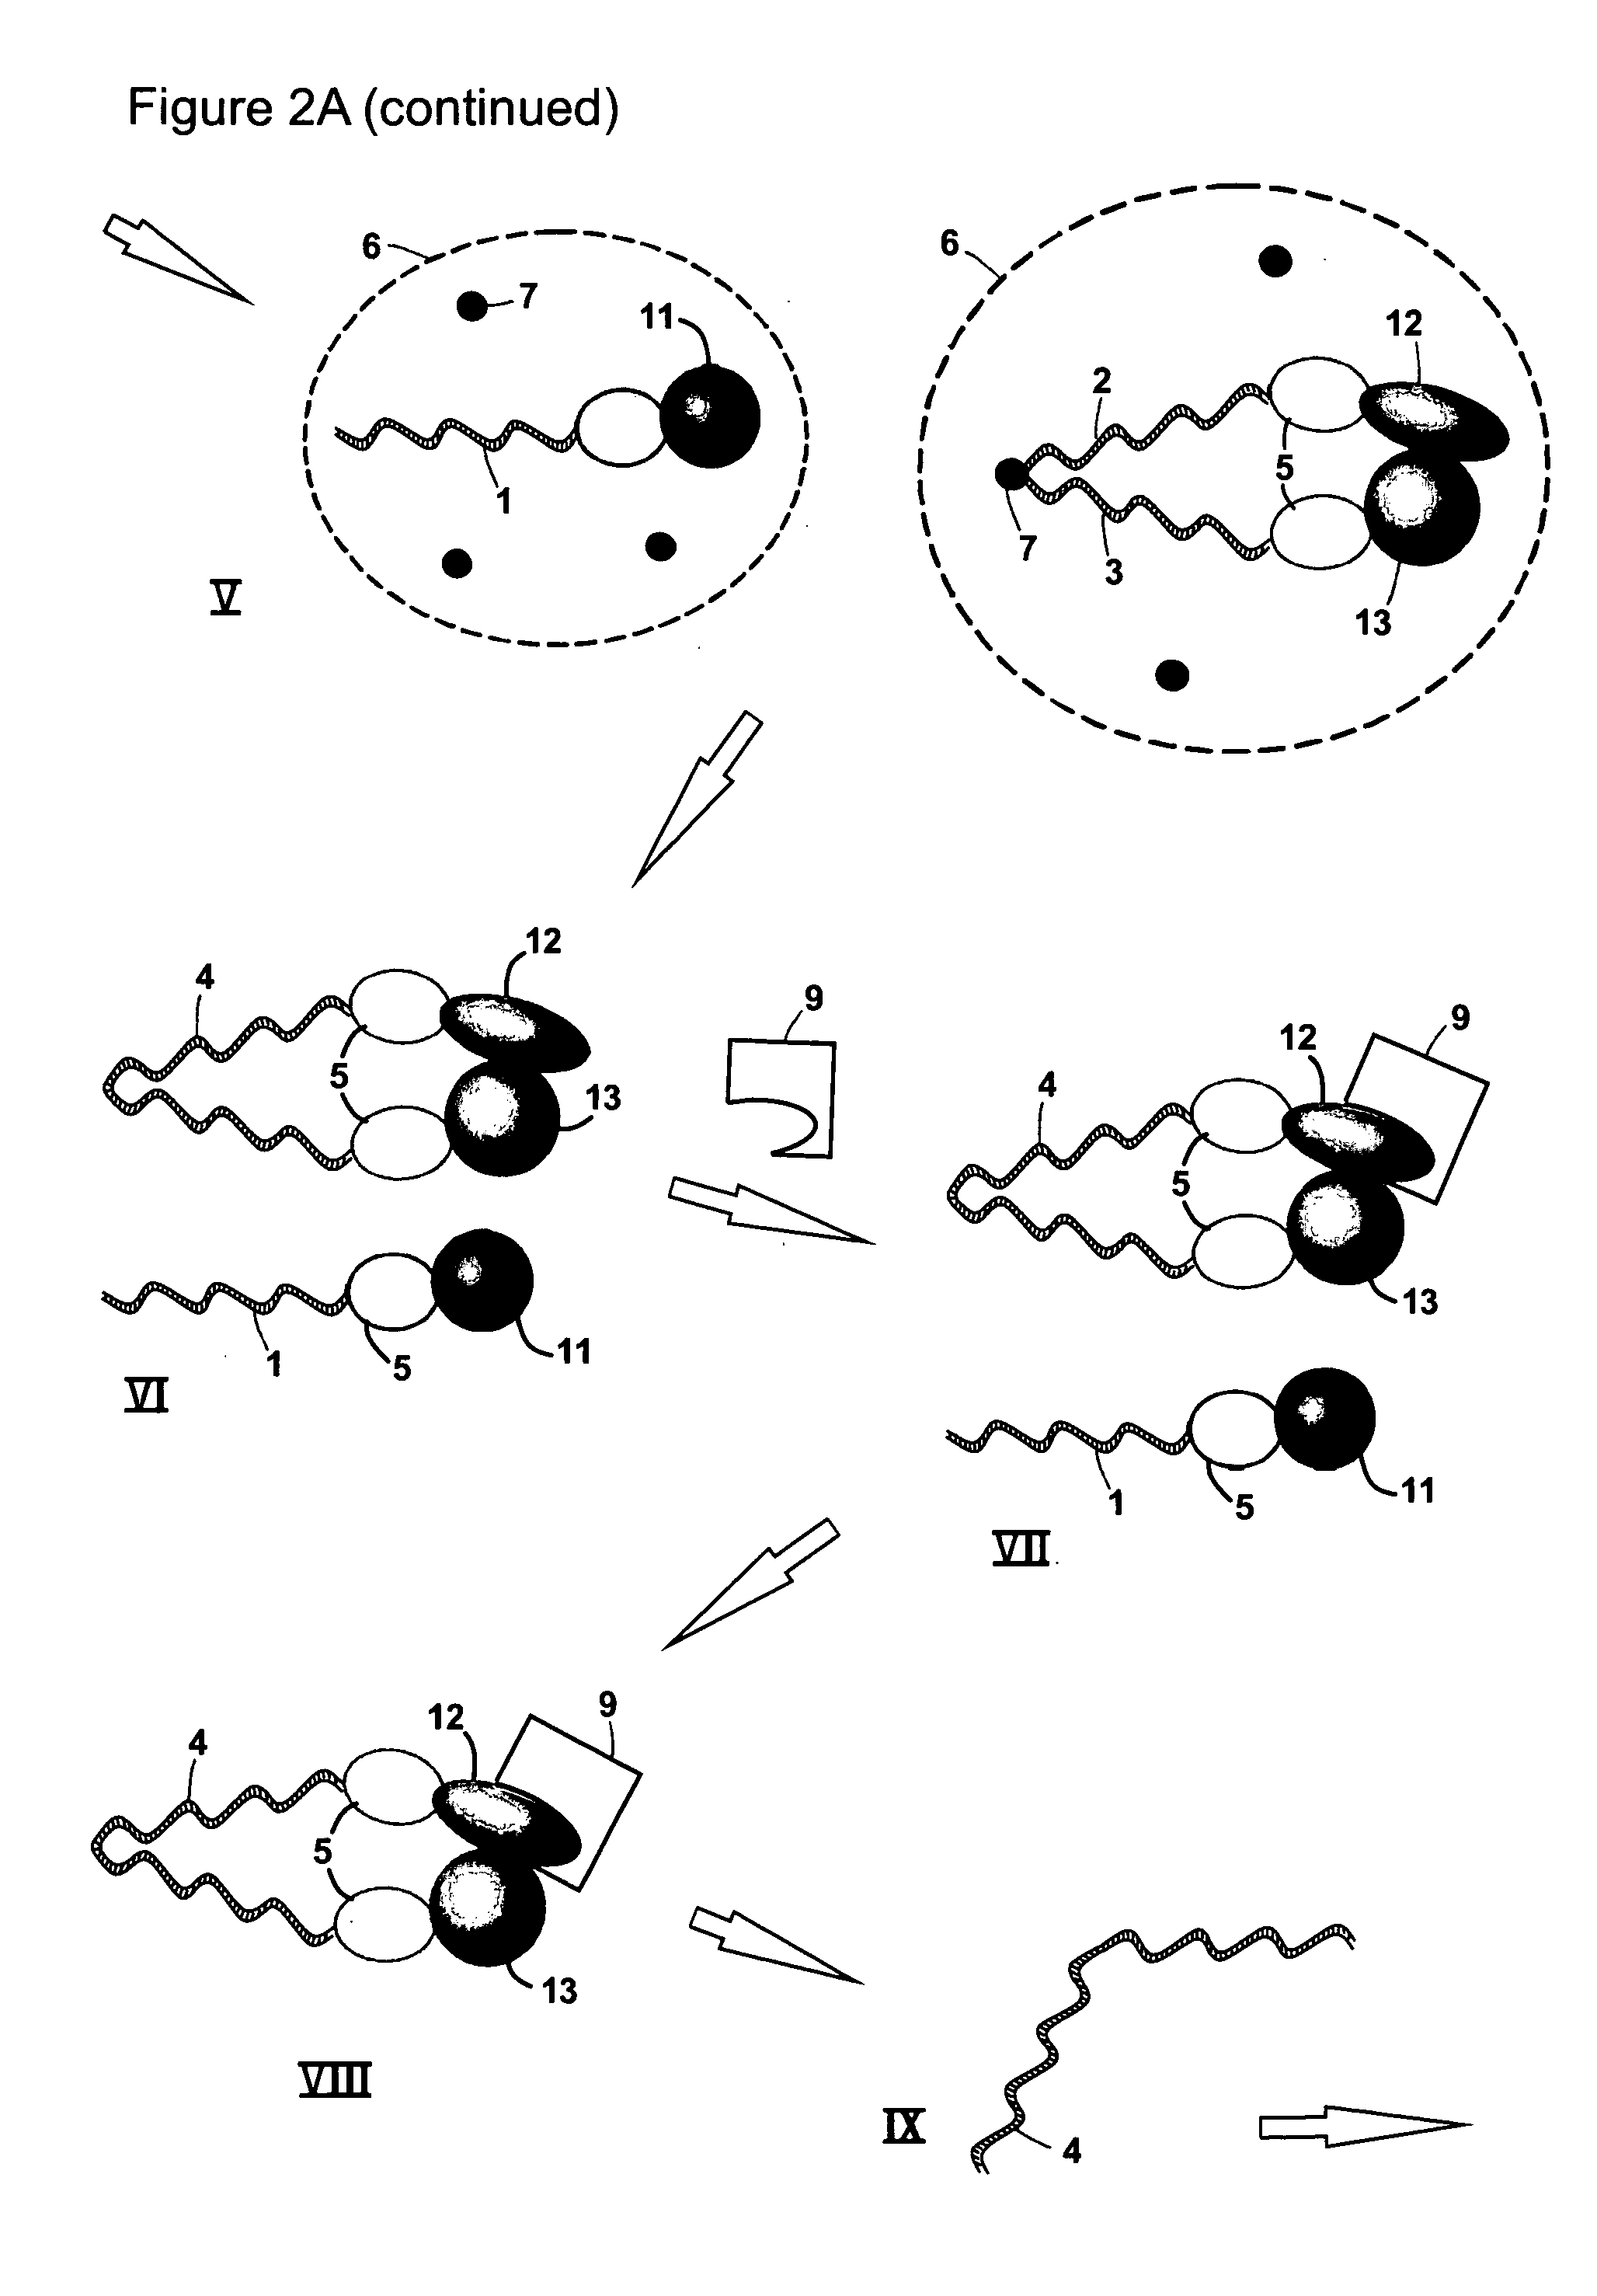 Methods of identifying a pair of binding partners